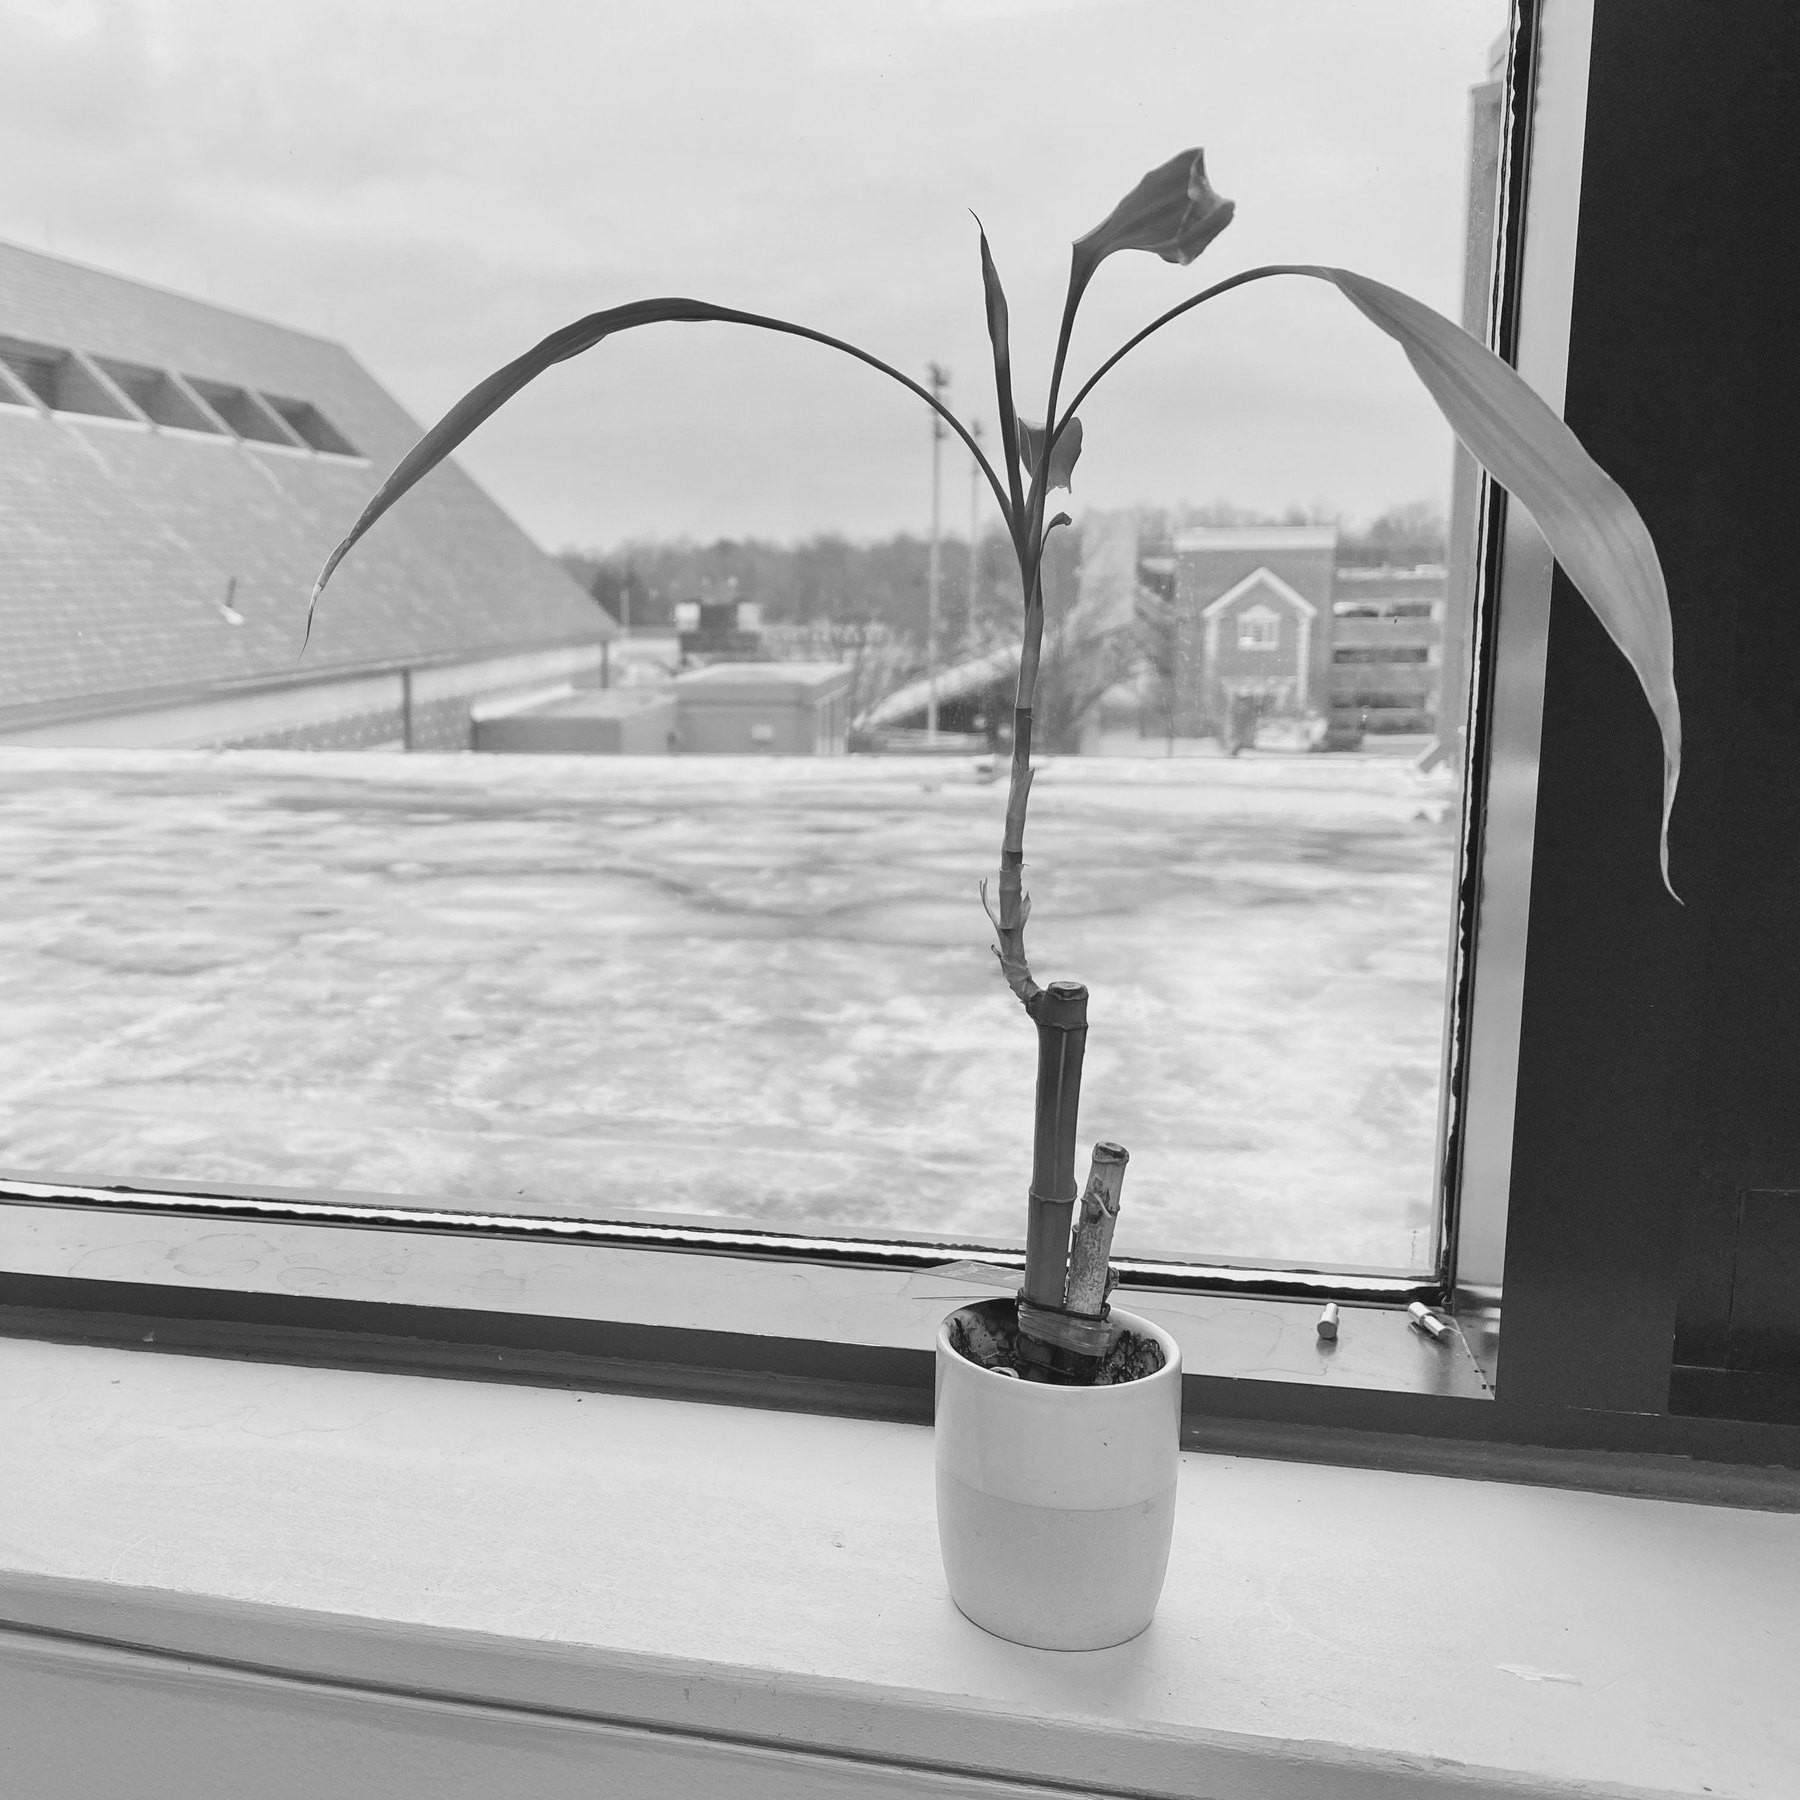 Plant in the faculty lounge by the window